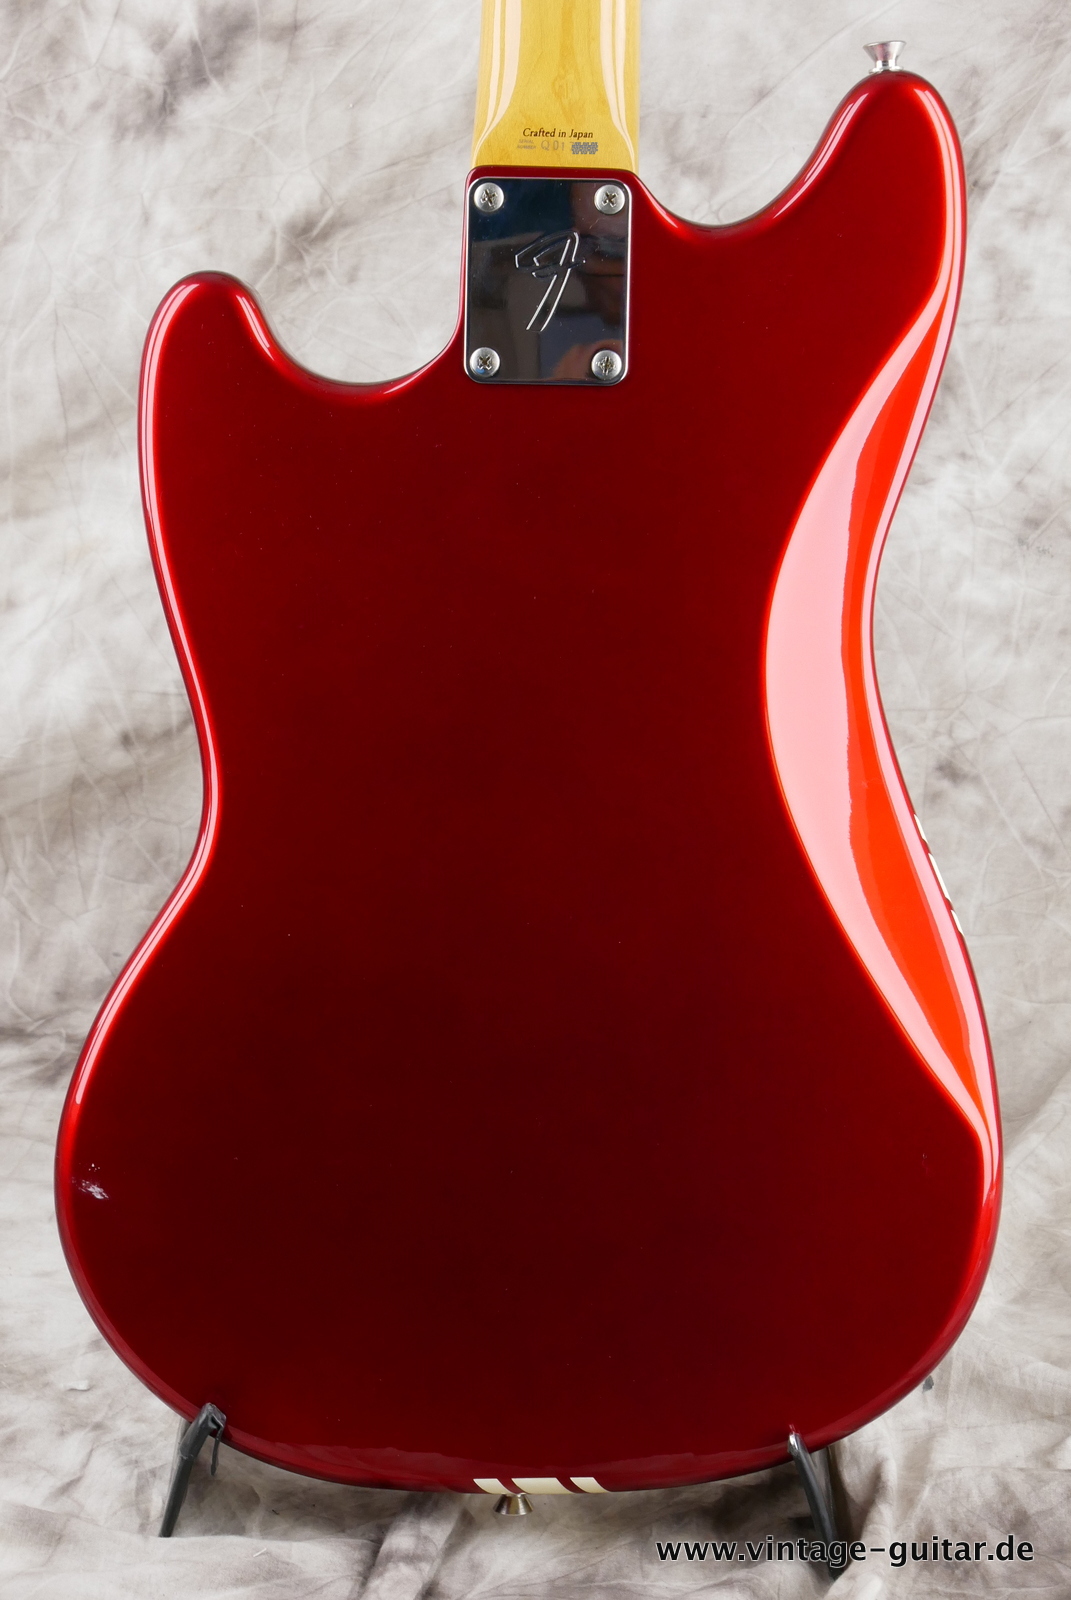 img/vintage/5133/Fender_Mustang_competition_70s_RI_candy_apple_red_Japan_2002-004.JPG